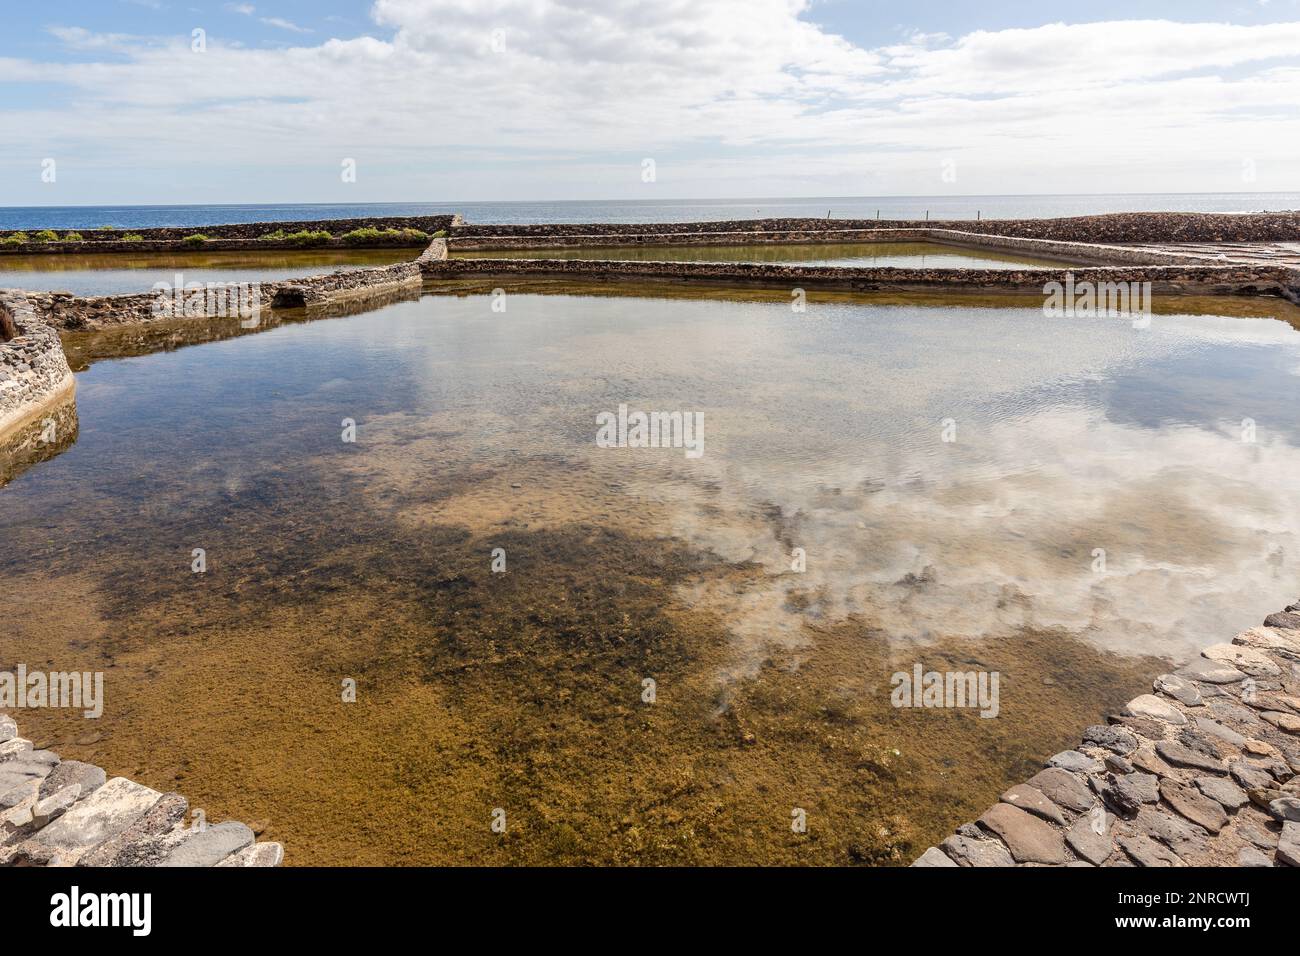 Concentration basin upstream of the saltworks evaporation pans of the salt museum in Fuerteventura. Stock Photo